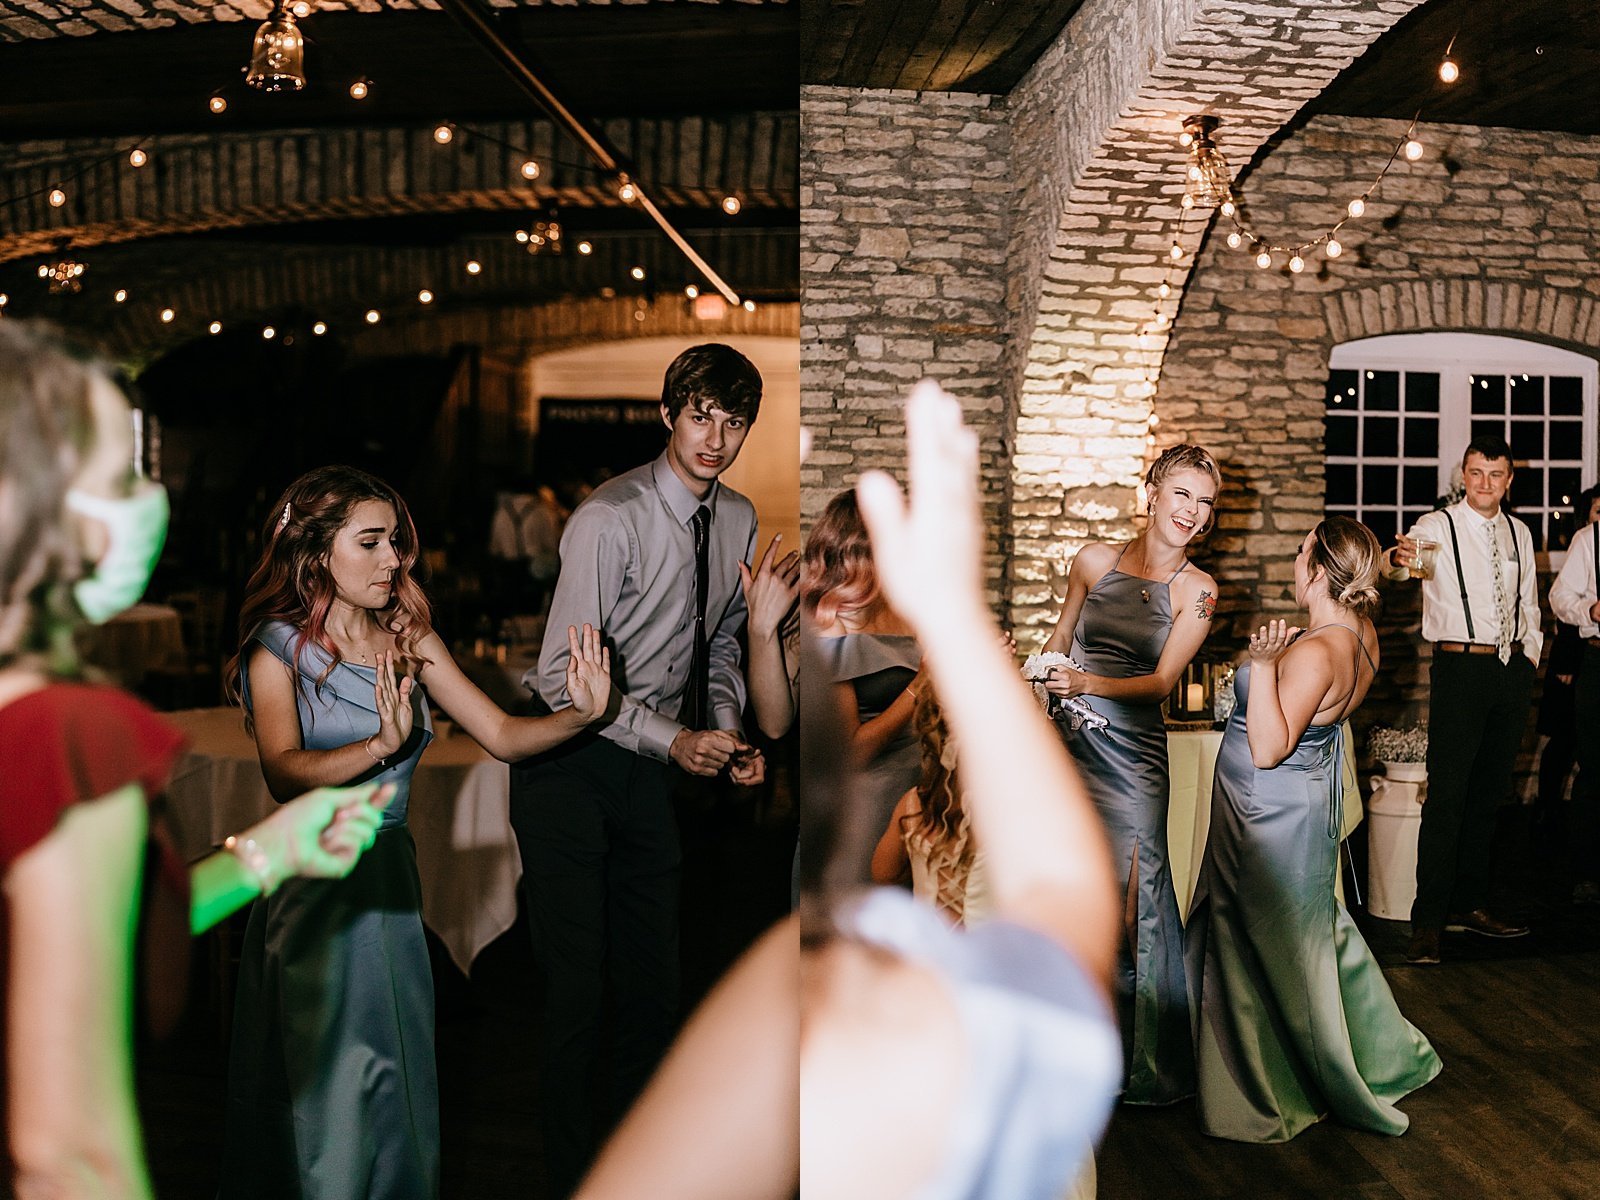  Bride and groom dancing with their guests at barn reception in Minnesota.  